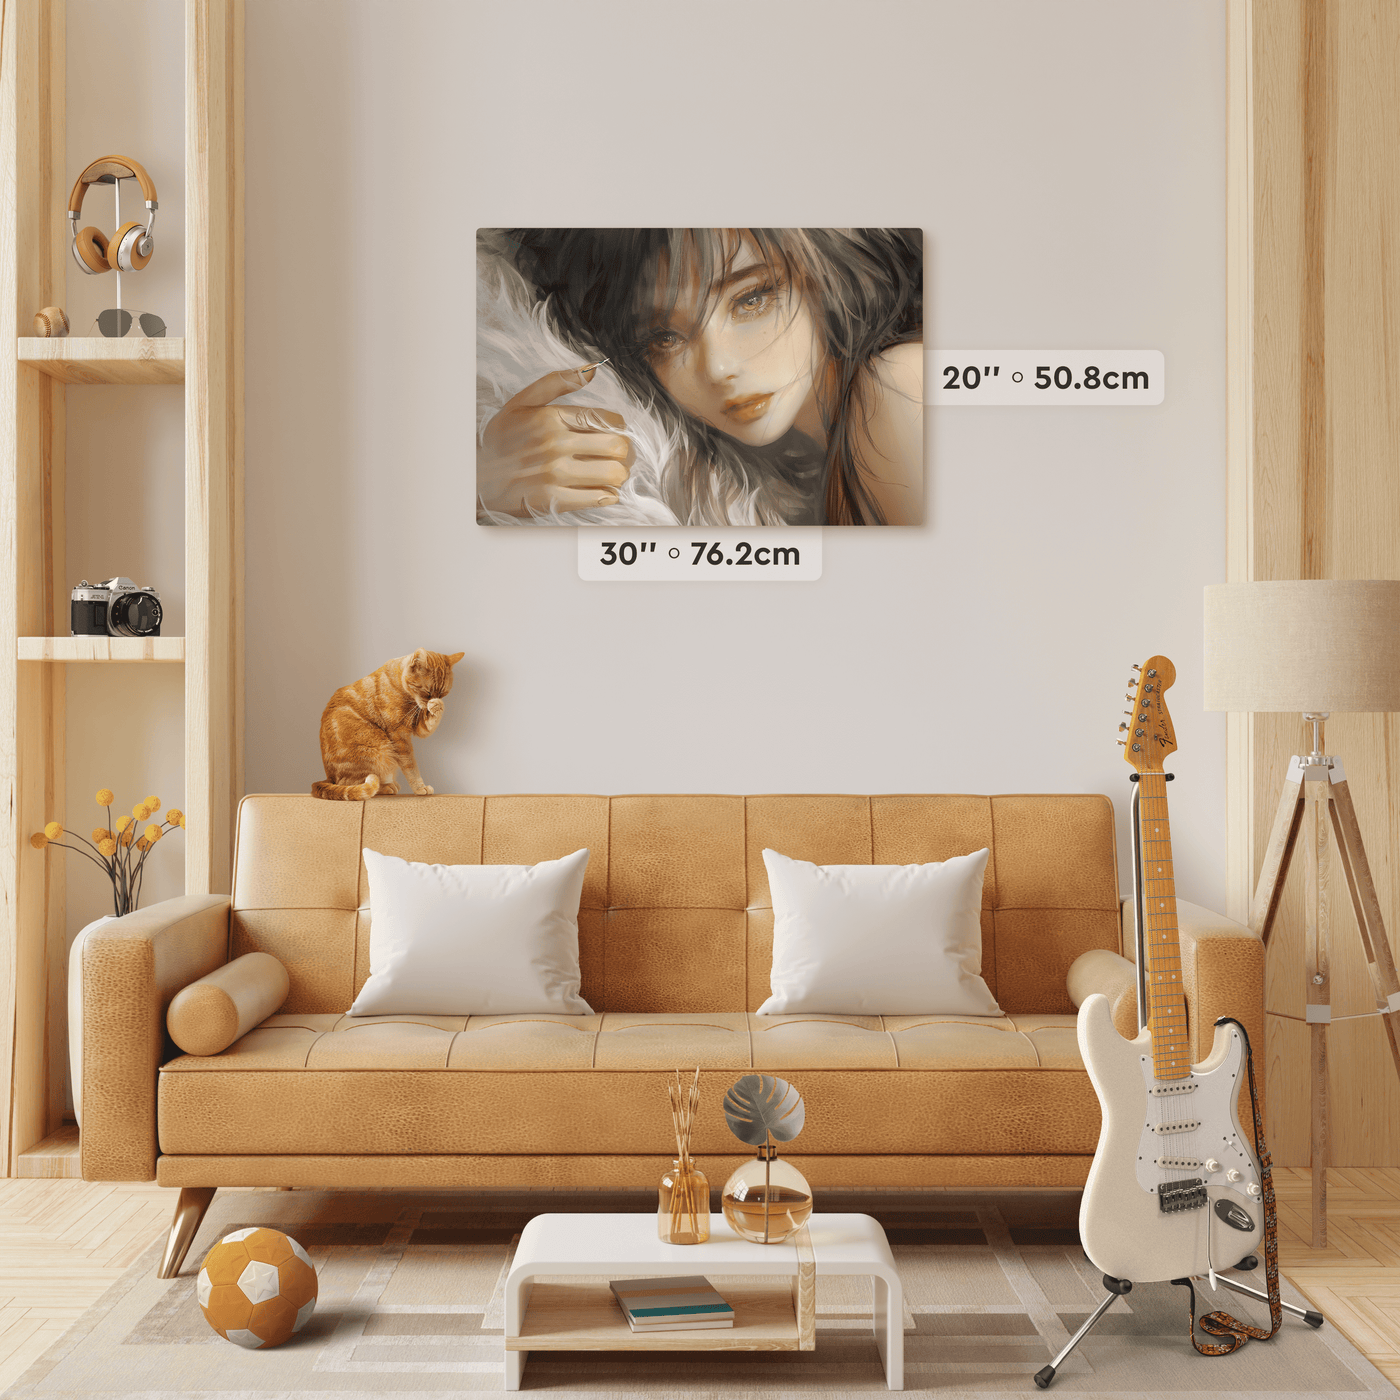 Large Custom Print on Metal 30''x20'' in size in living room interior.